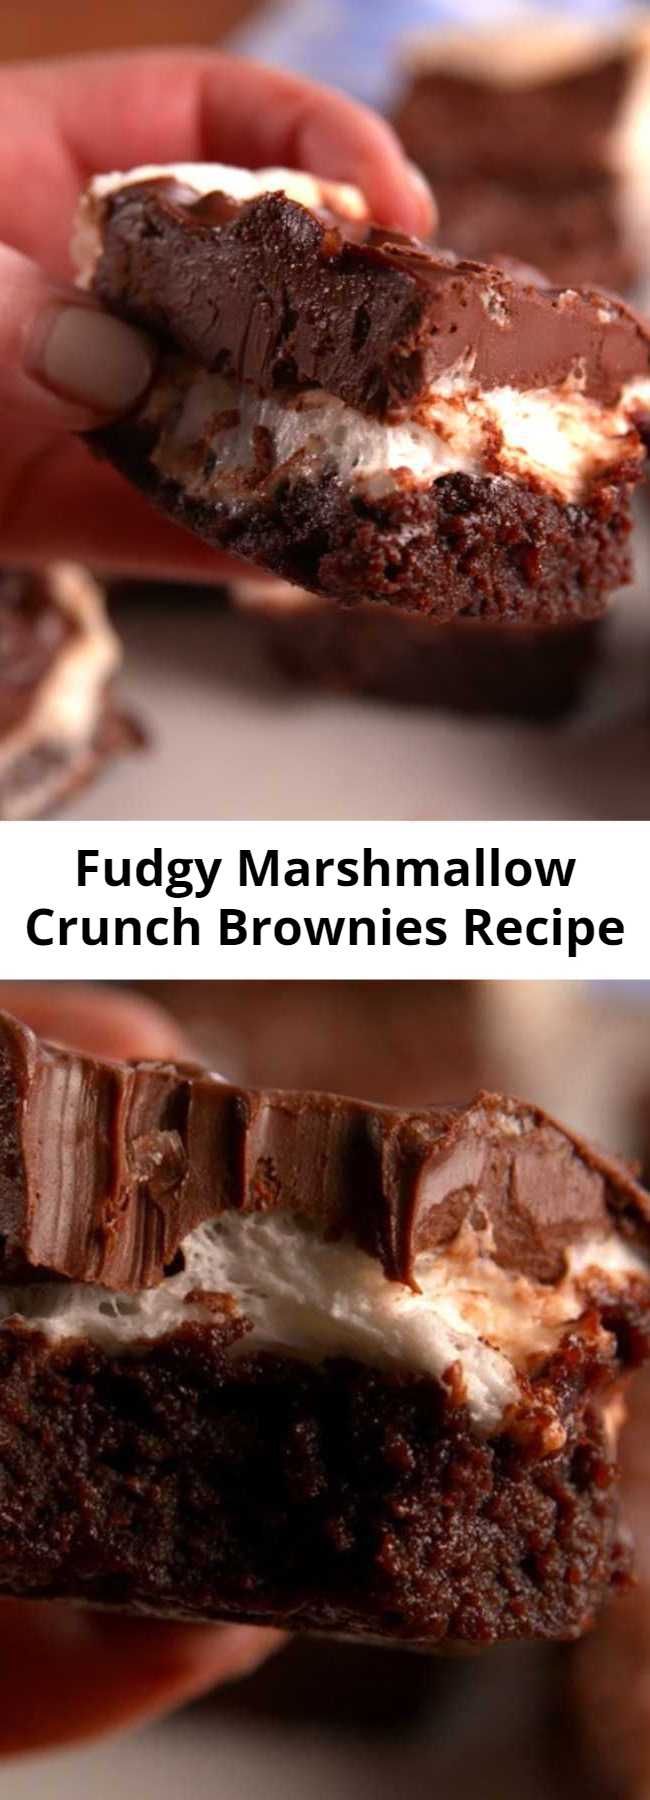 Fudgy Marshmallow Crunch Brownies Recipe - Fudgy, chewy, and completely gluten-free. Super fudgy brownies topped with a layer of marshmallows and a chocolate, peanut butter and Rice Krispies mixture.